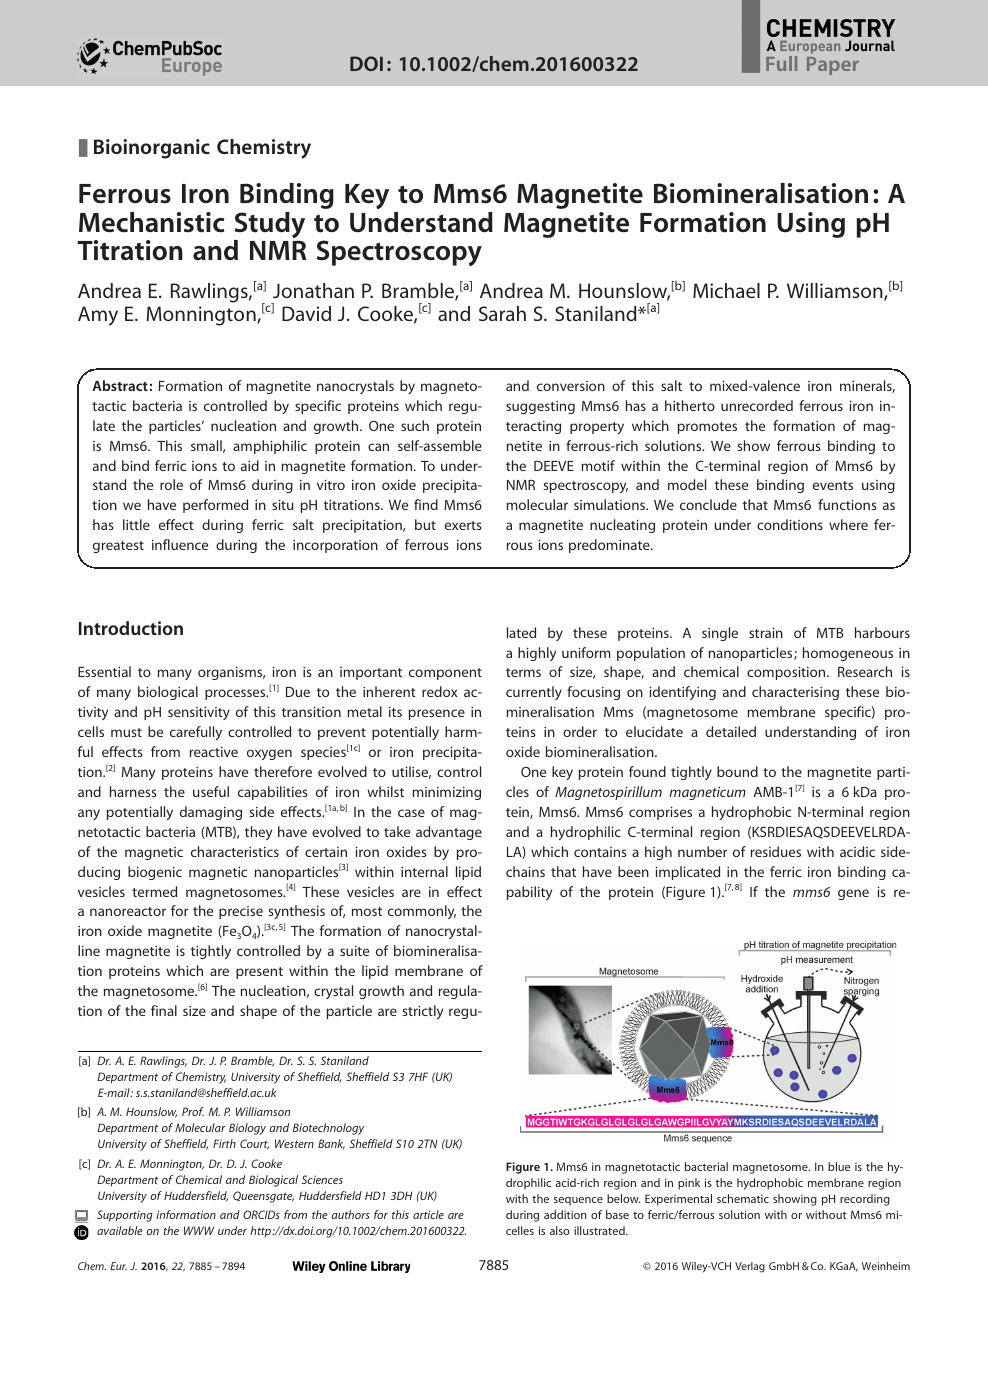 Ferrous Iron Binding Key To Mms6 Magnetite Biomineralisation A Mechanistic Study To Understand Magnetite Formation Using Ph Titration And Nmr Spectroscopy Topic Of Research Paper In Biological Sciences Download Scholarly Article